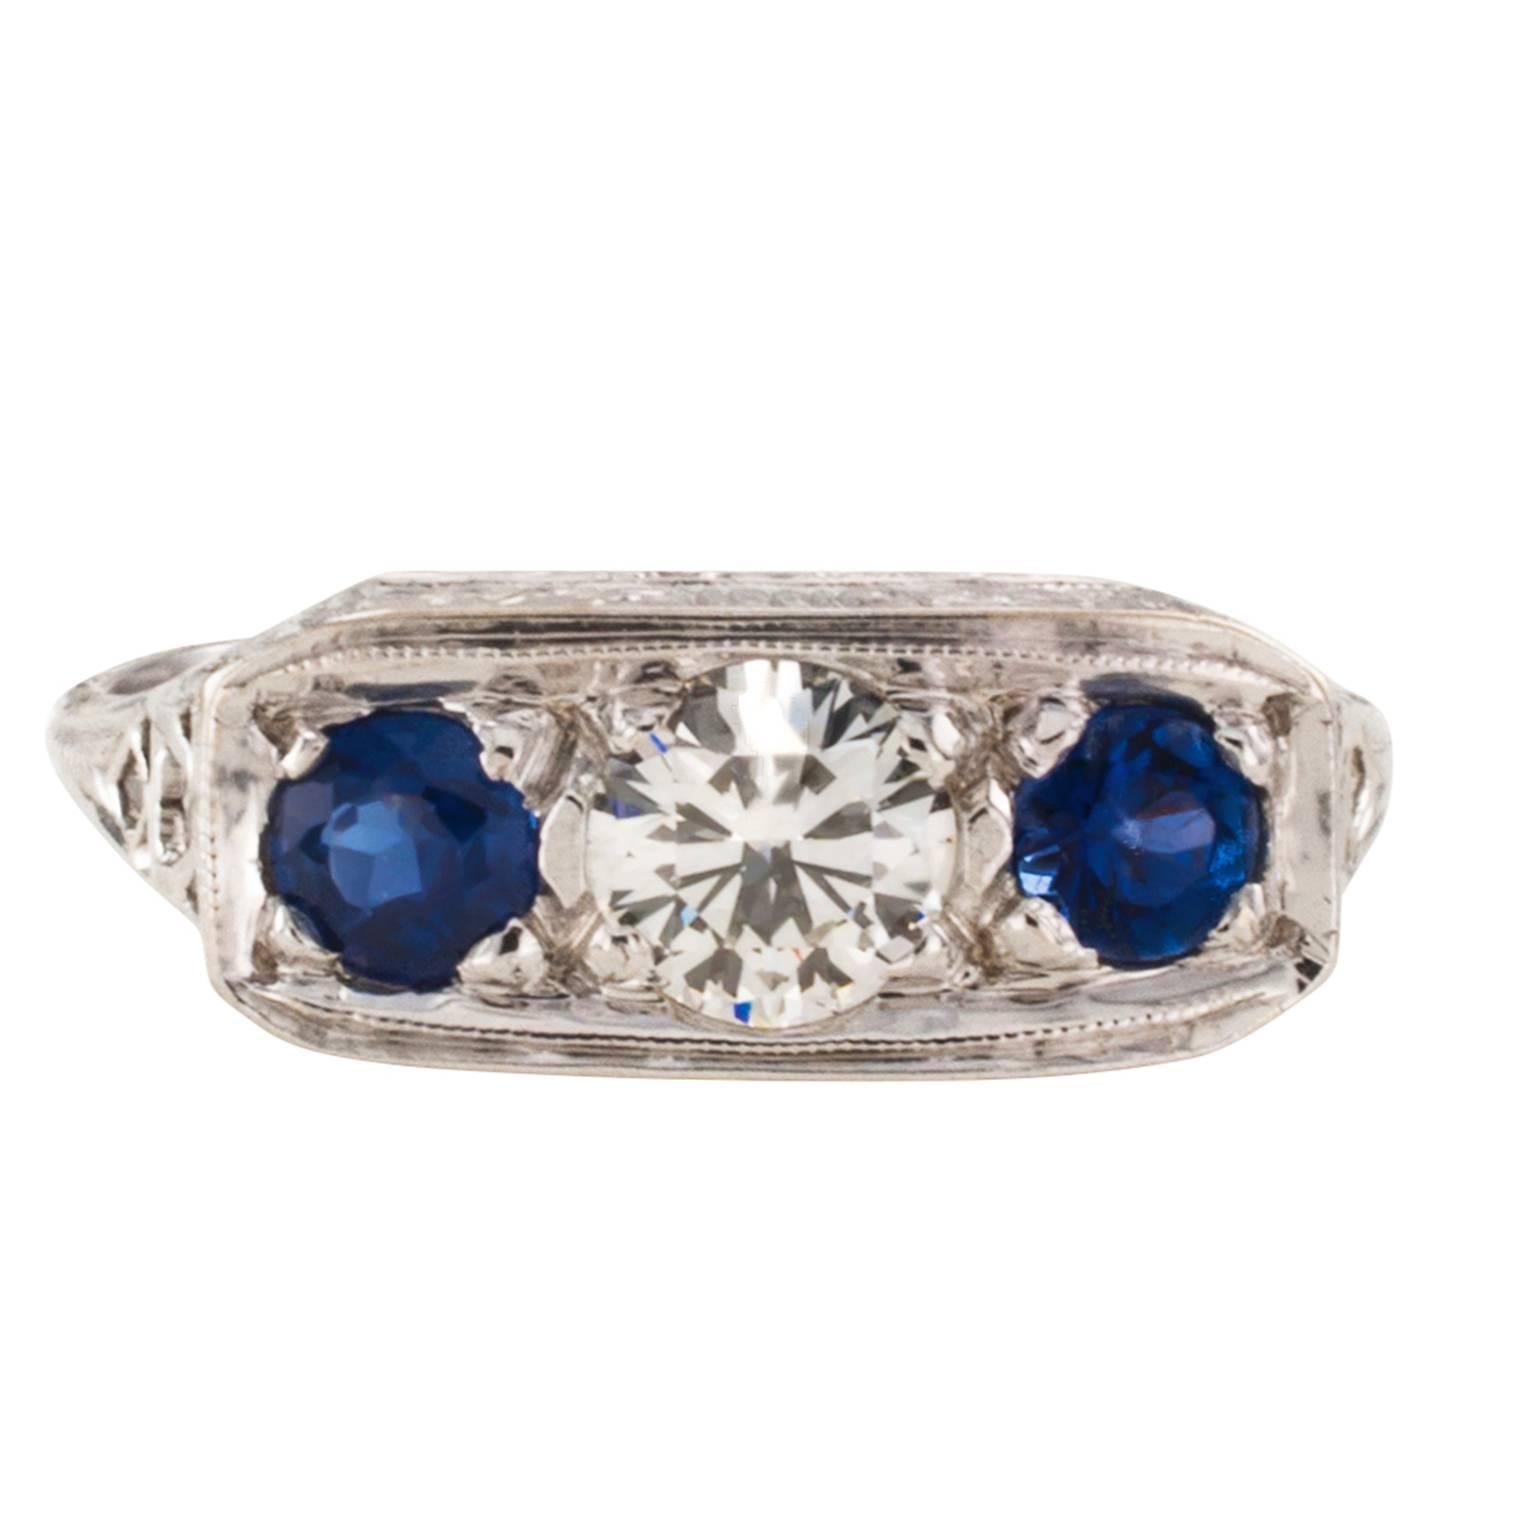 Art Deco Three-Stone Ring

Distinctive and traditional Art Deco three-stone ring centering upon a round diamond weighing approximately 0.45 carat, approximately K color and VS clarity, flanked by a pair of circular-cut sapphires totaling